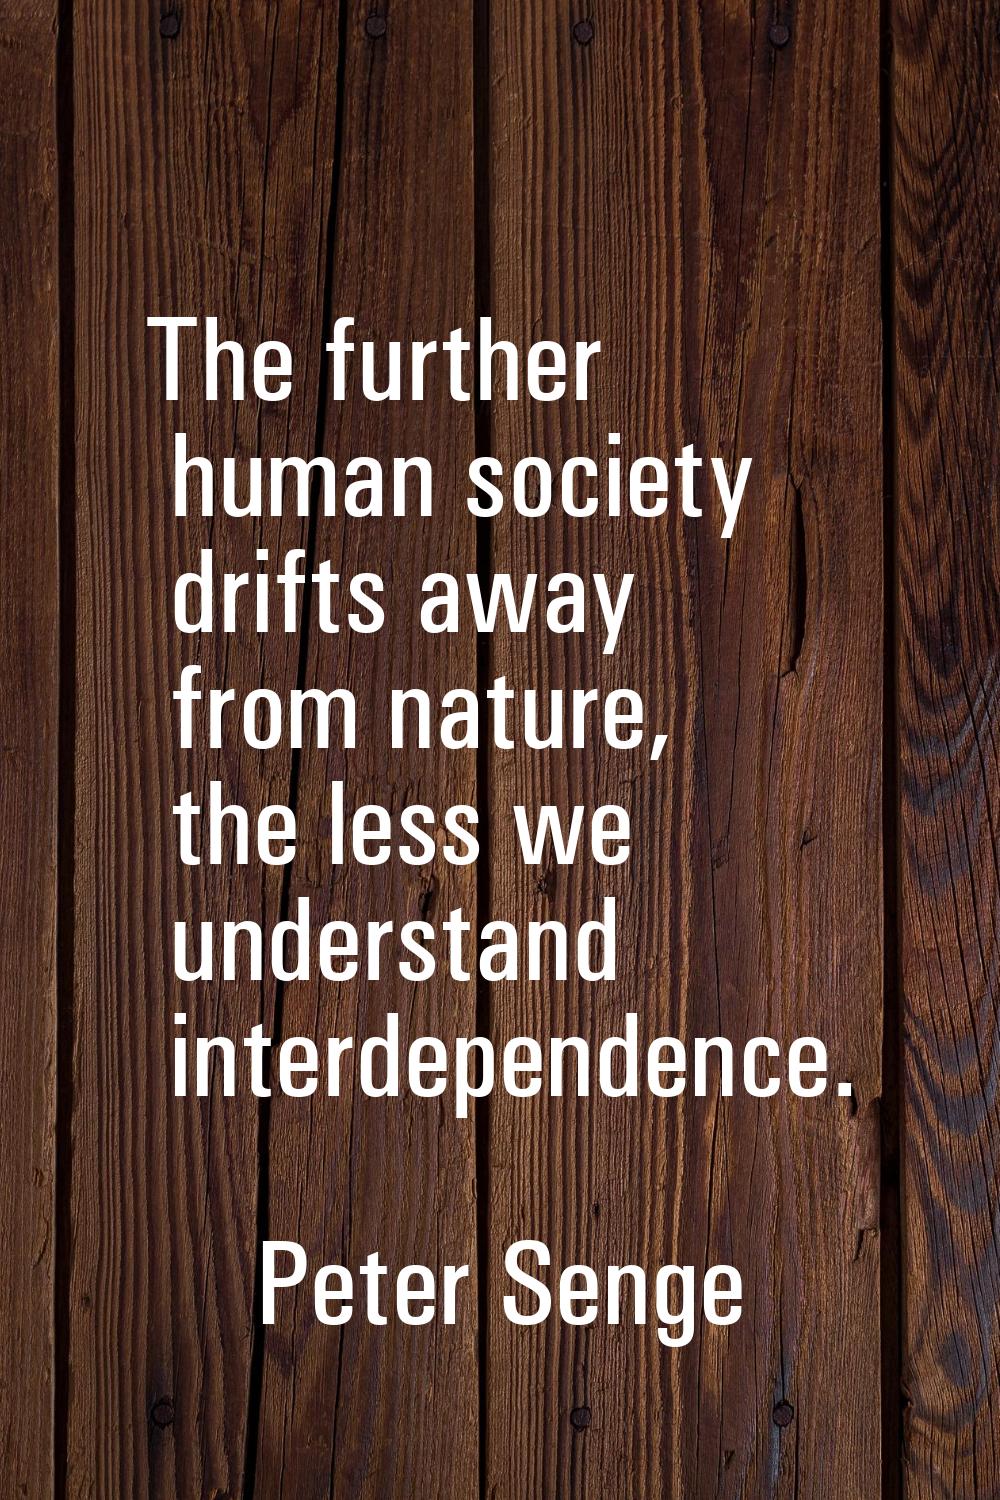 The further human society drifts away from nature, the less we understand interdependence.